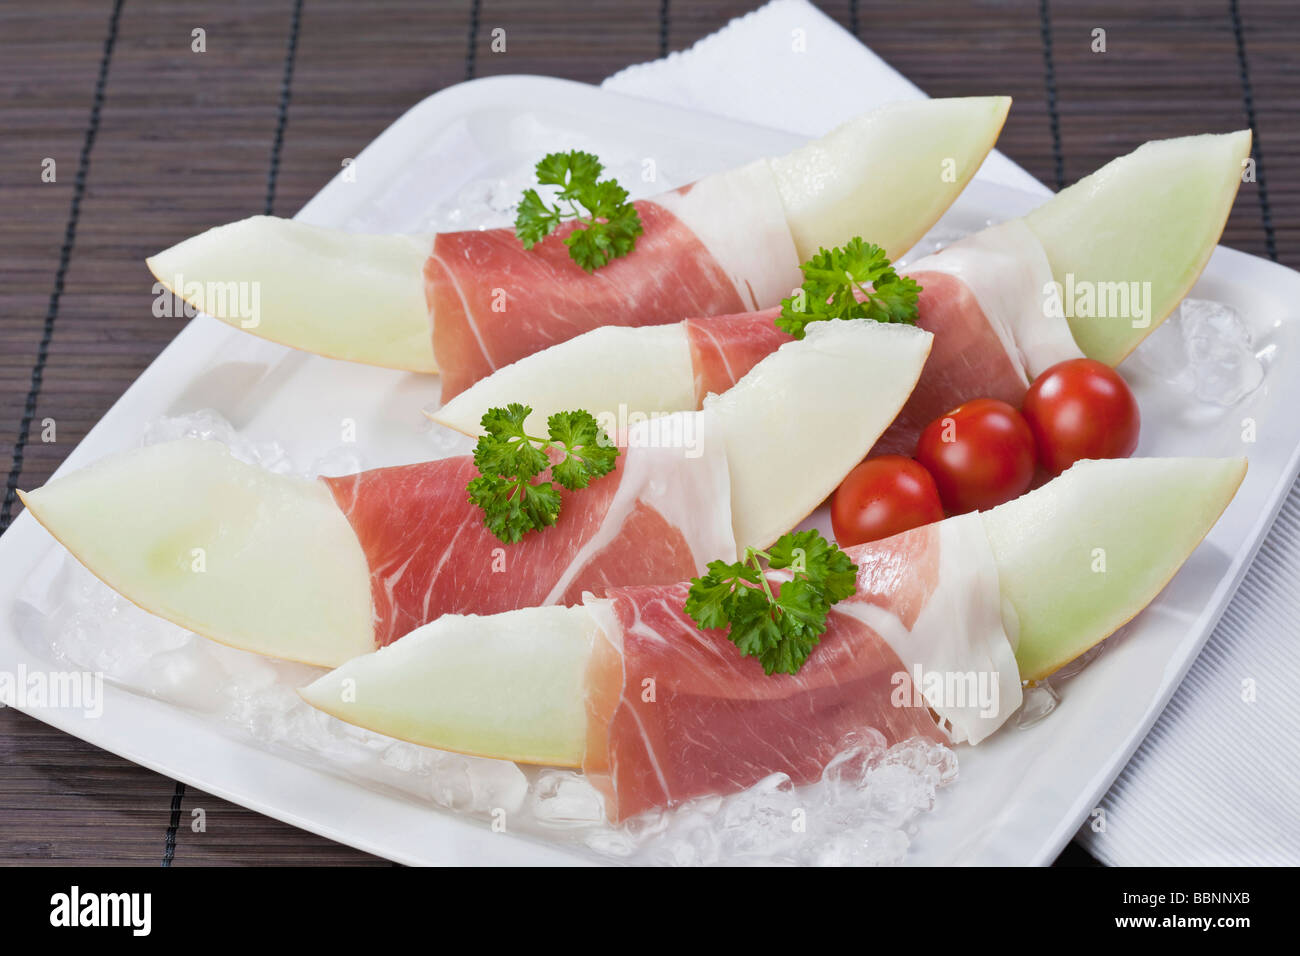 Melon slices with Parma ham on crushed ice Stock Photo